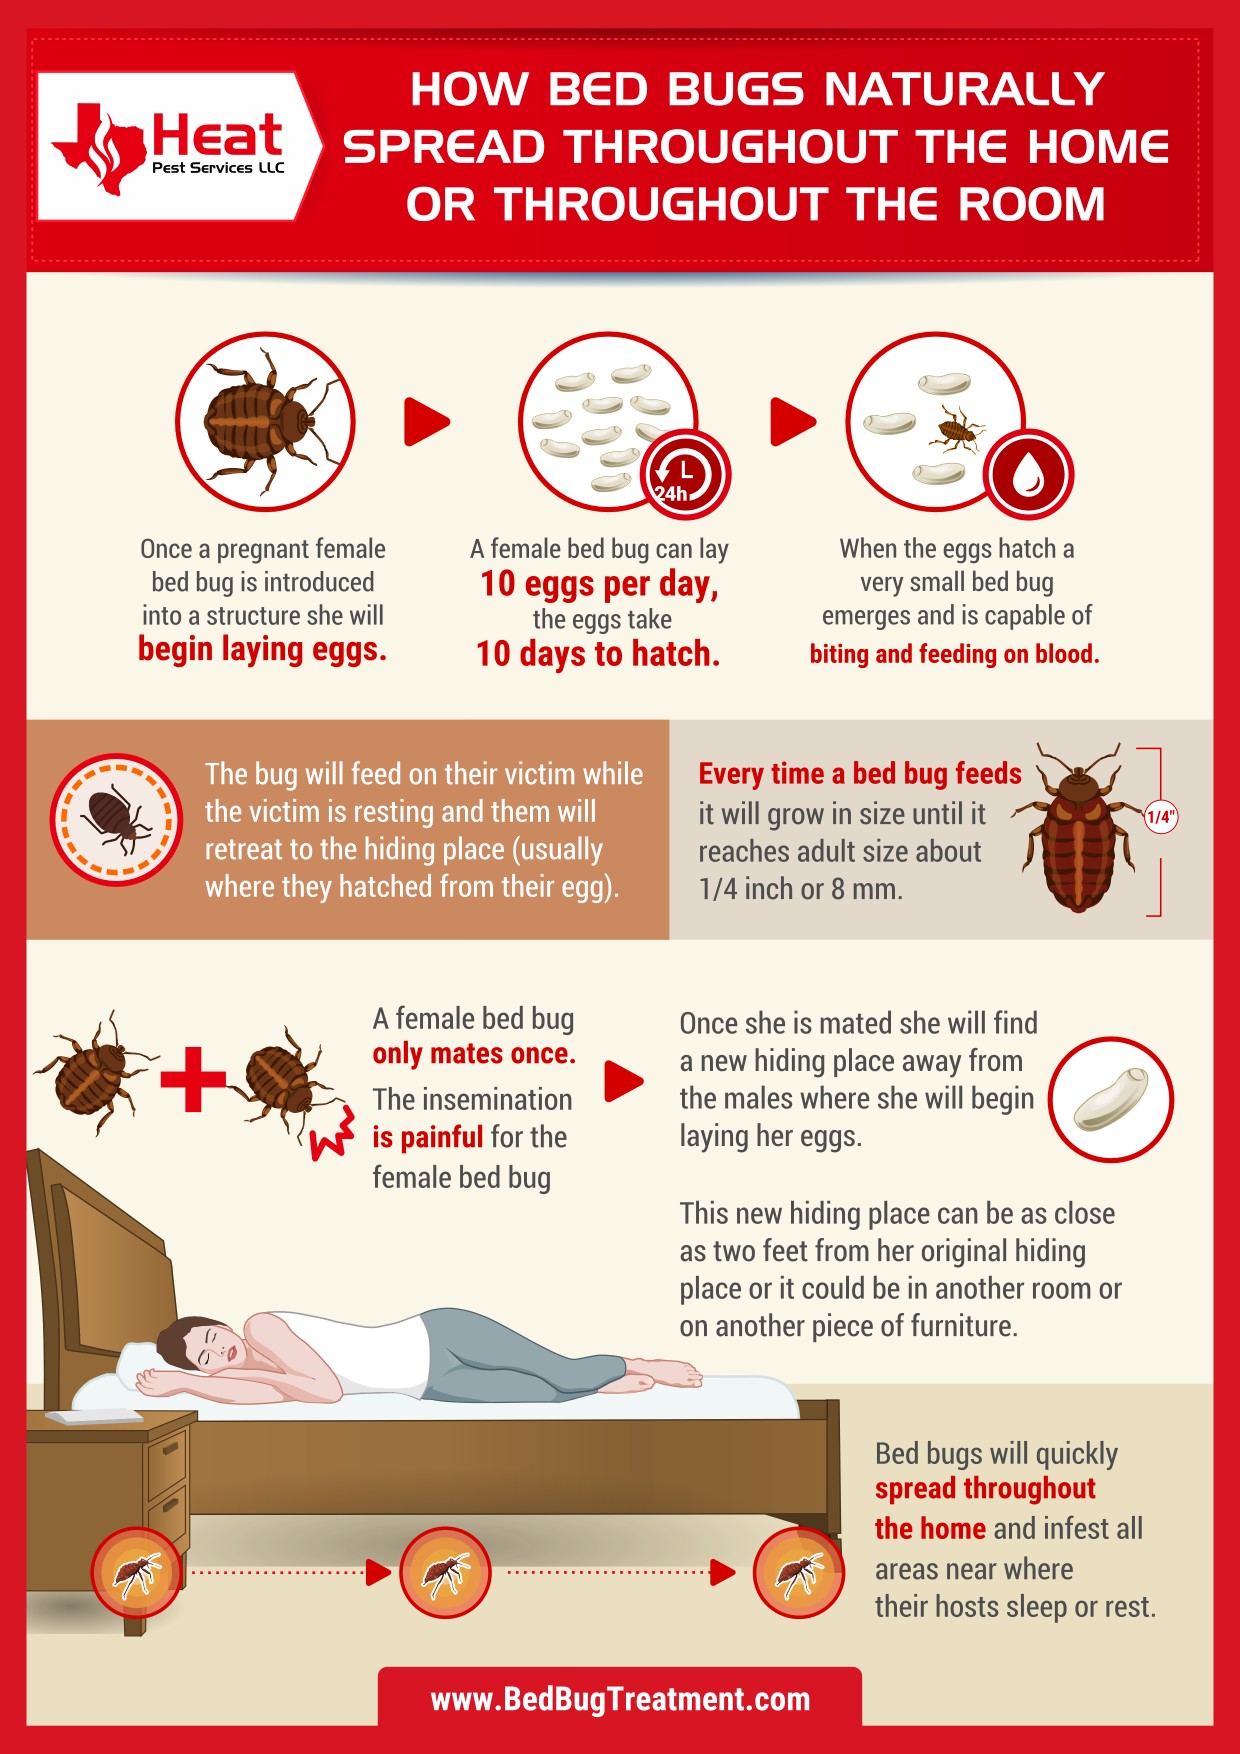 infographic about how bed bugs spread in San antonio homes